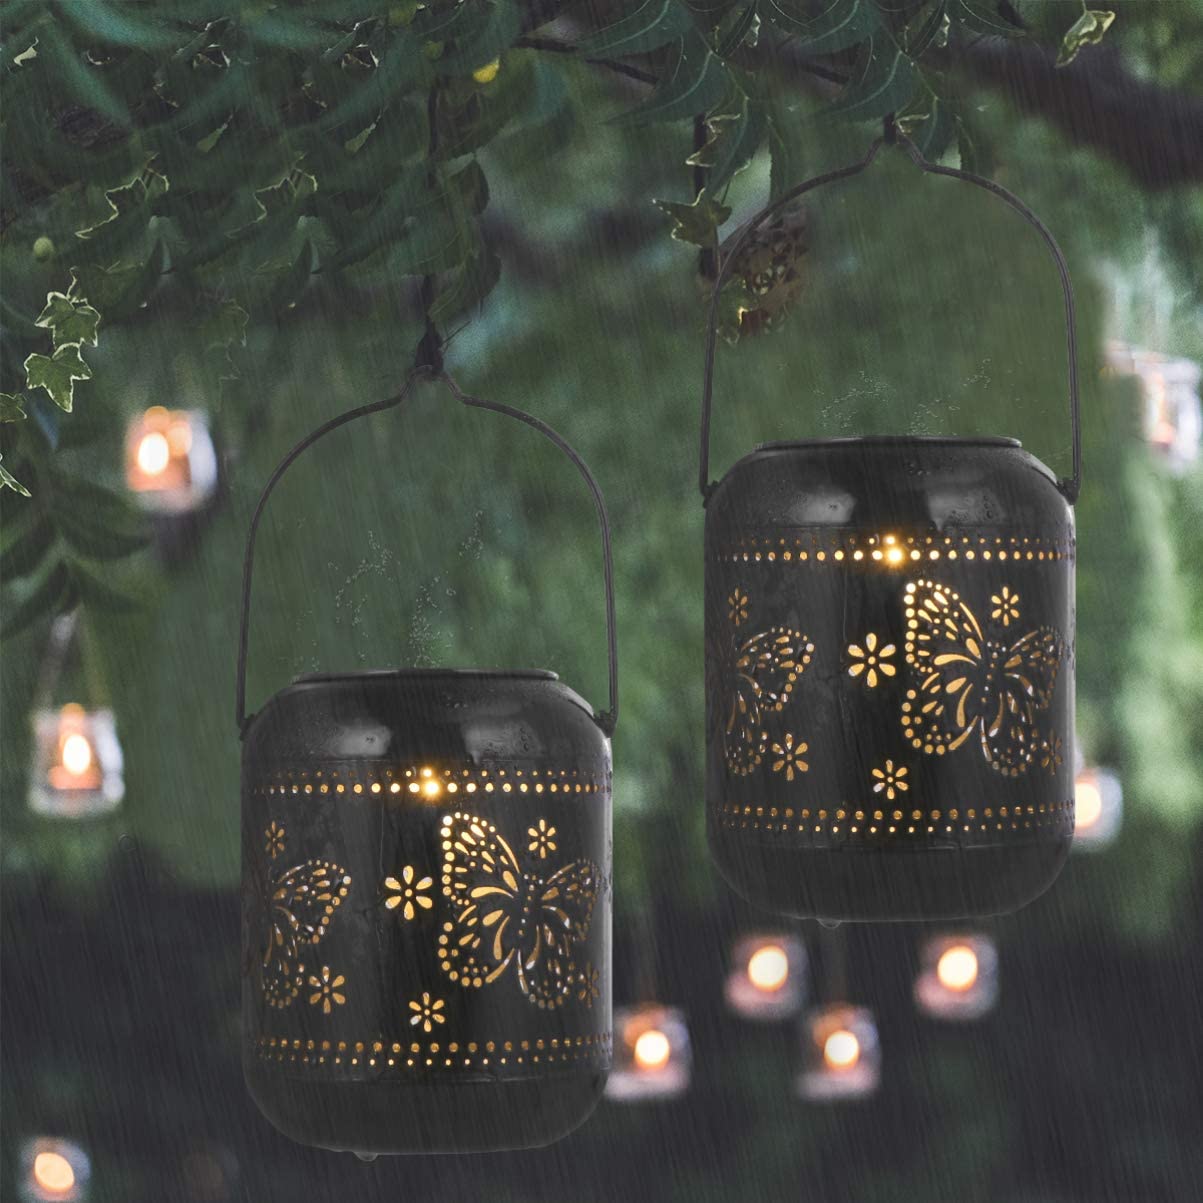 Hanging Solar Lantern Outdoor Retro Butterfly LED Solar Lamp Lantern Decorative Tabletop Light with Handle for Garden Patio Landscape Yard